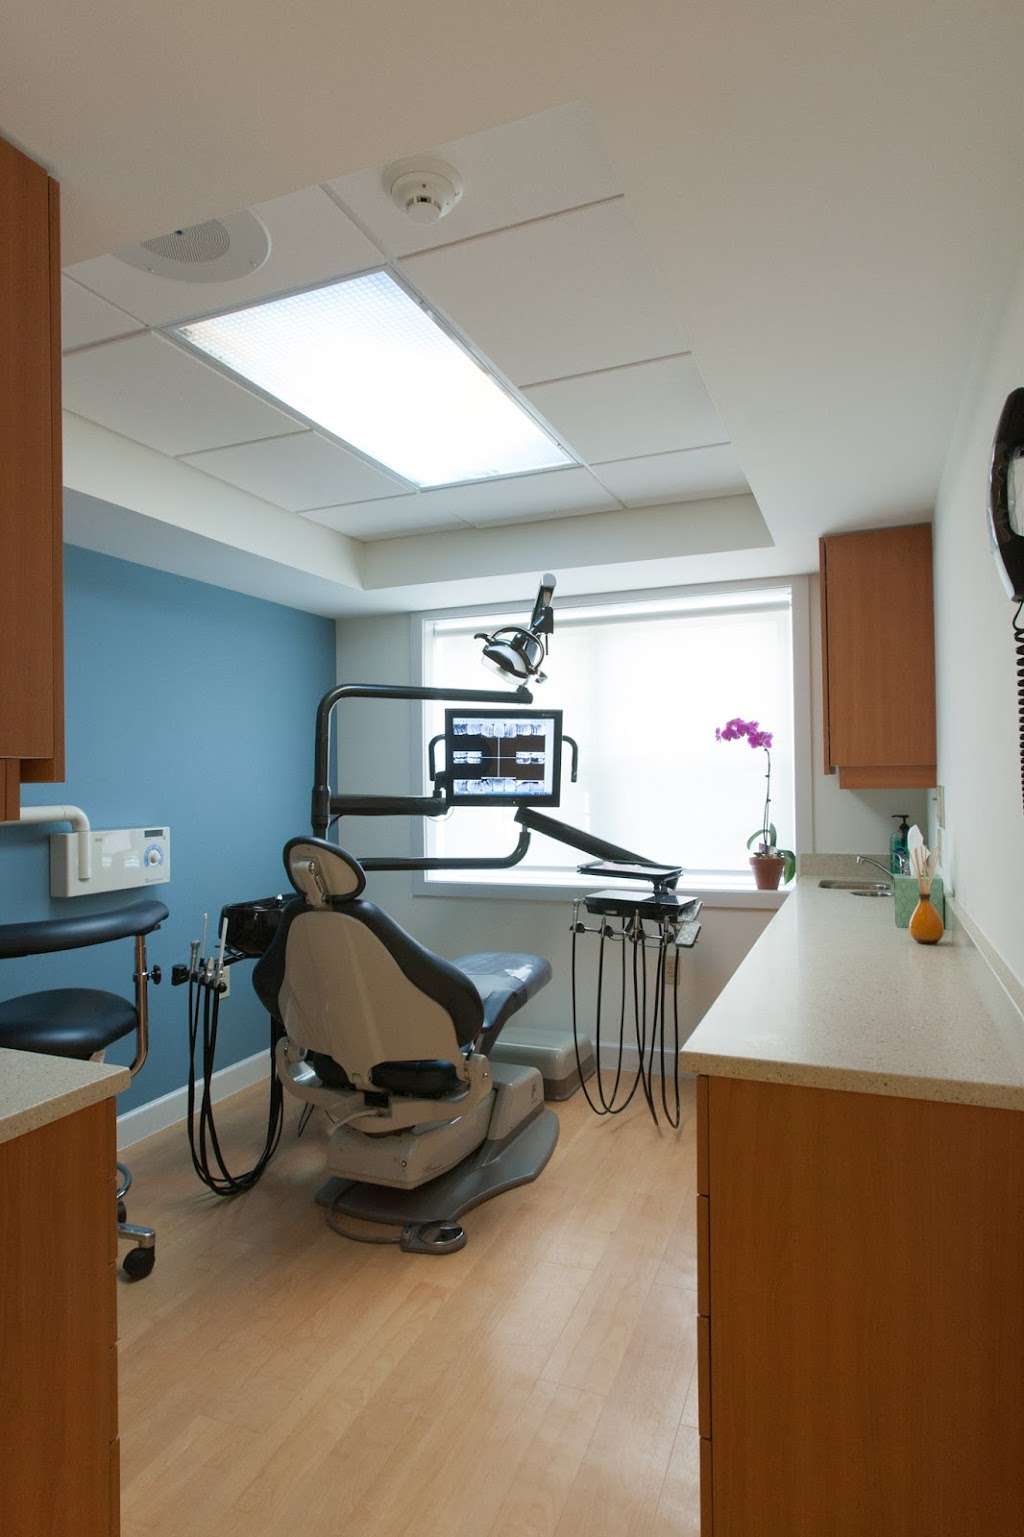 New Smile Dentistry | 225 Lakeview Ave, Clifton, NJ 07011, USA | Phone: (973) 253-3500